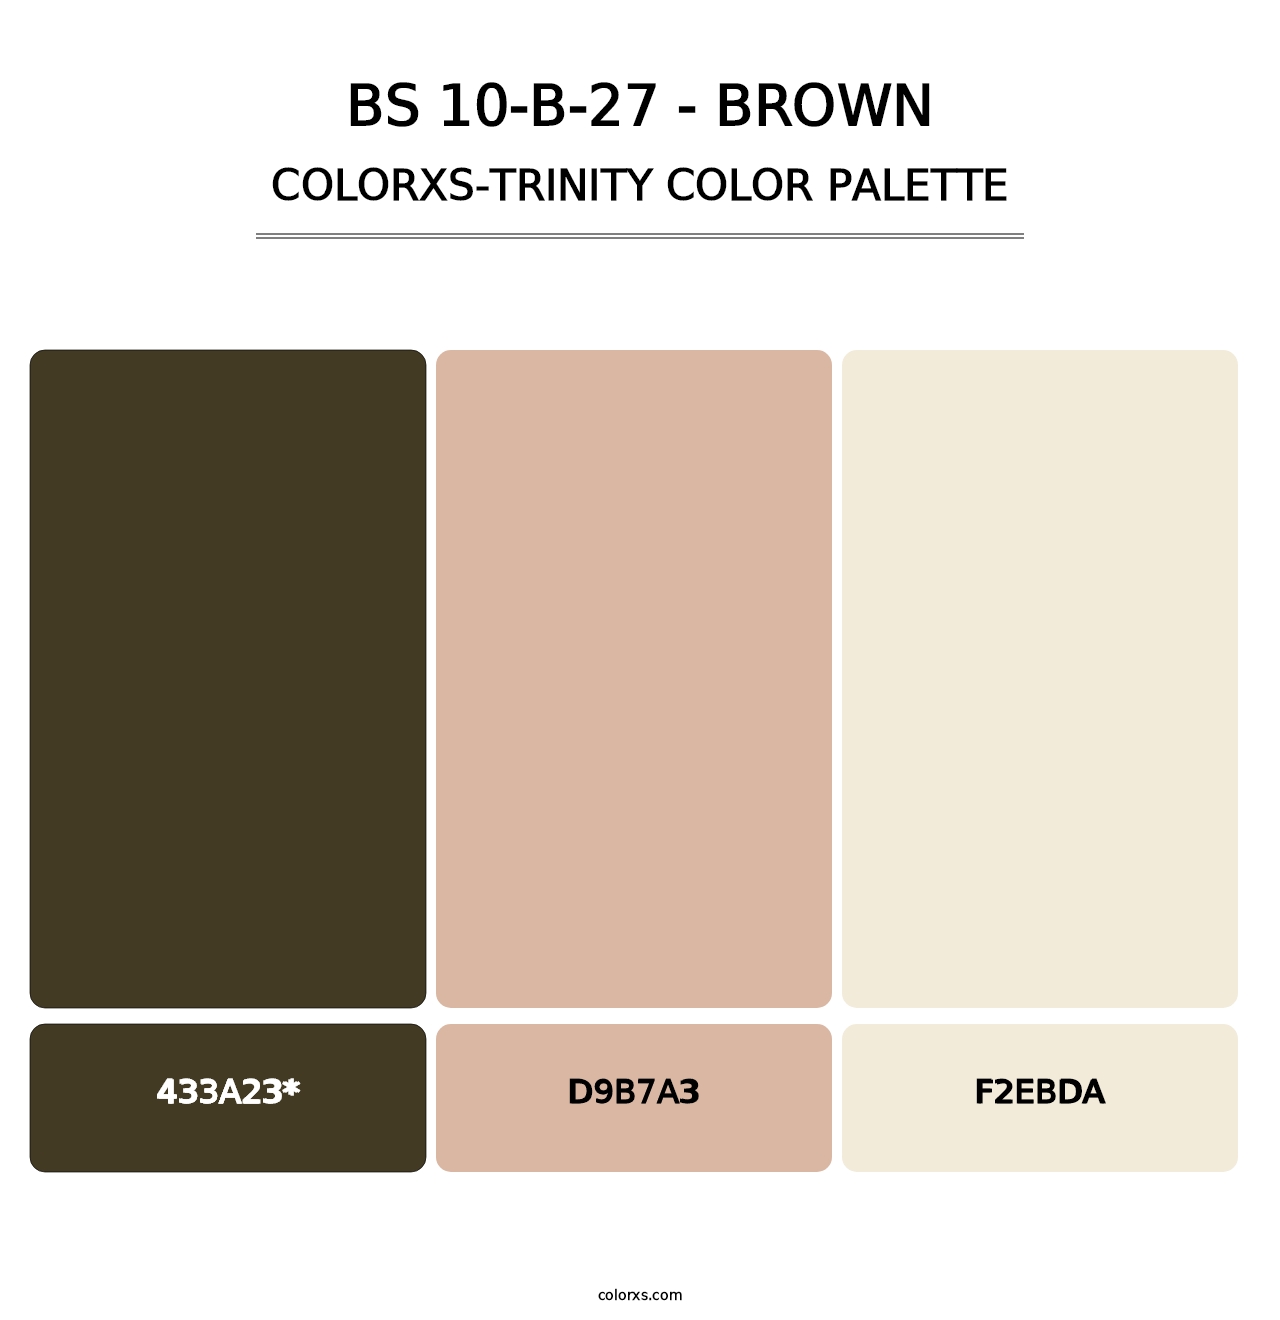 BS 10-B-27 - Brown - Colorxs Trinity Palette